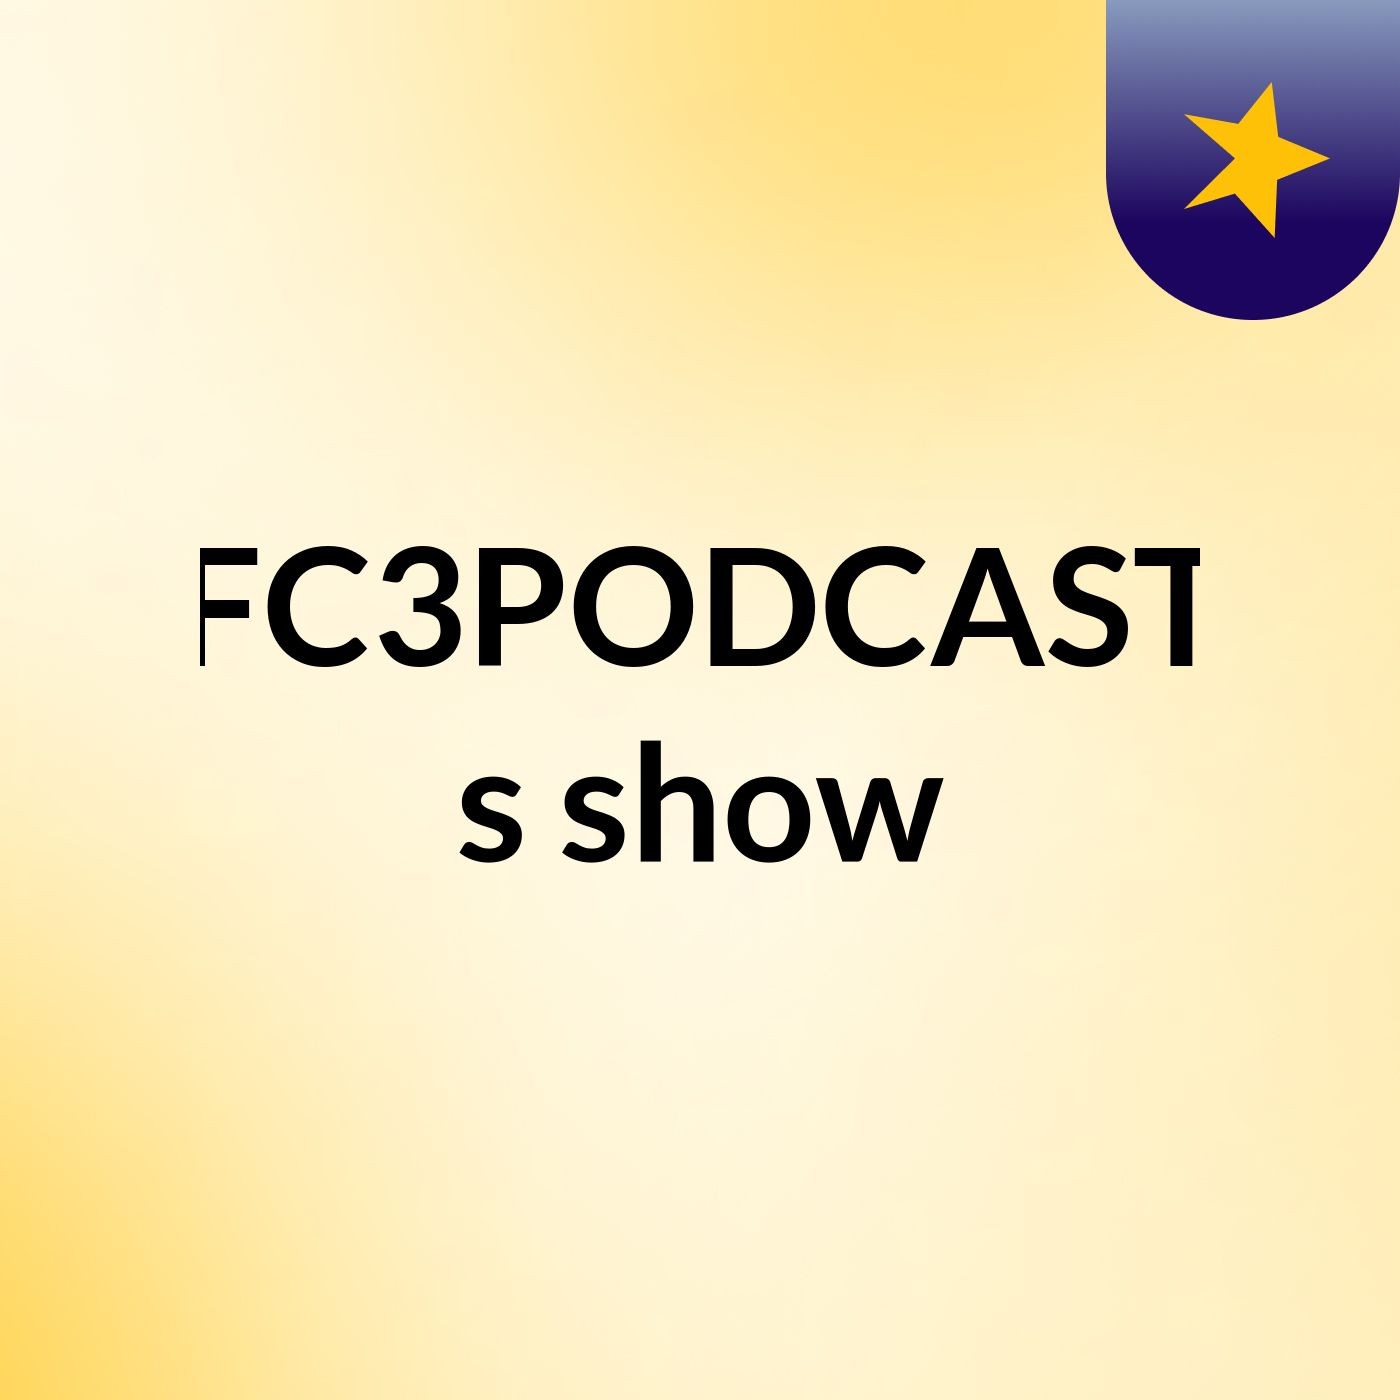 FC3PODCAST's show